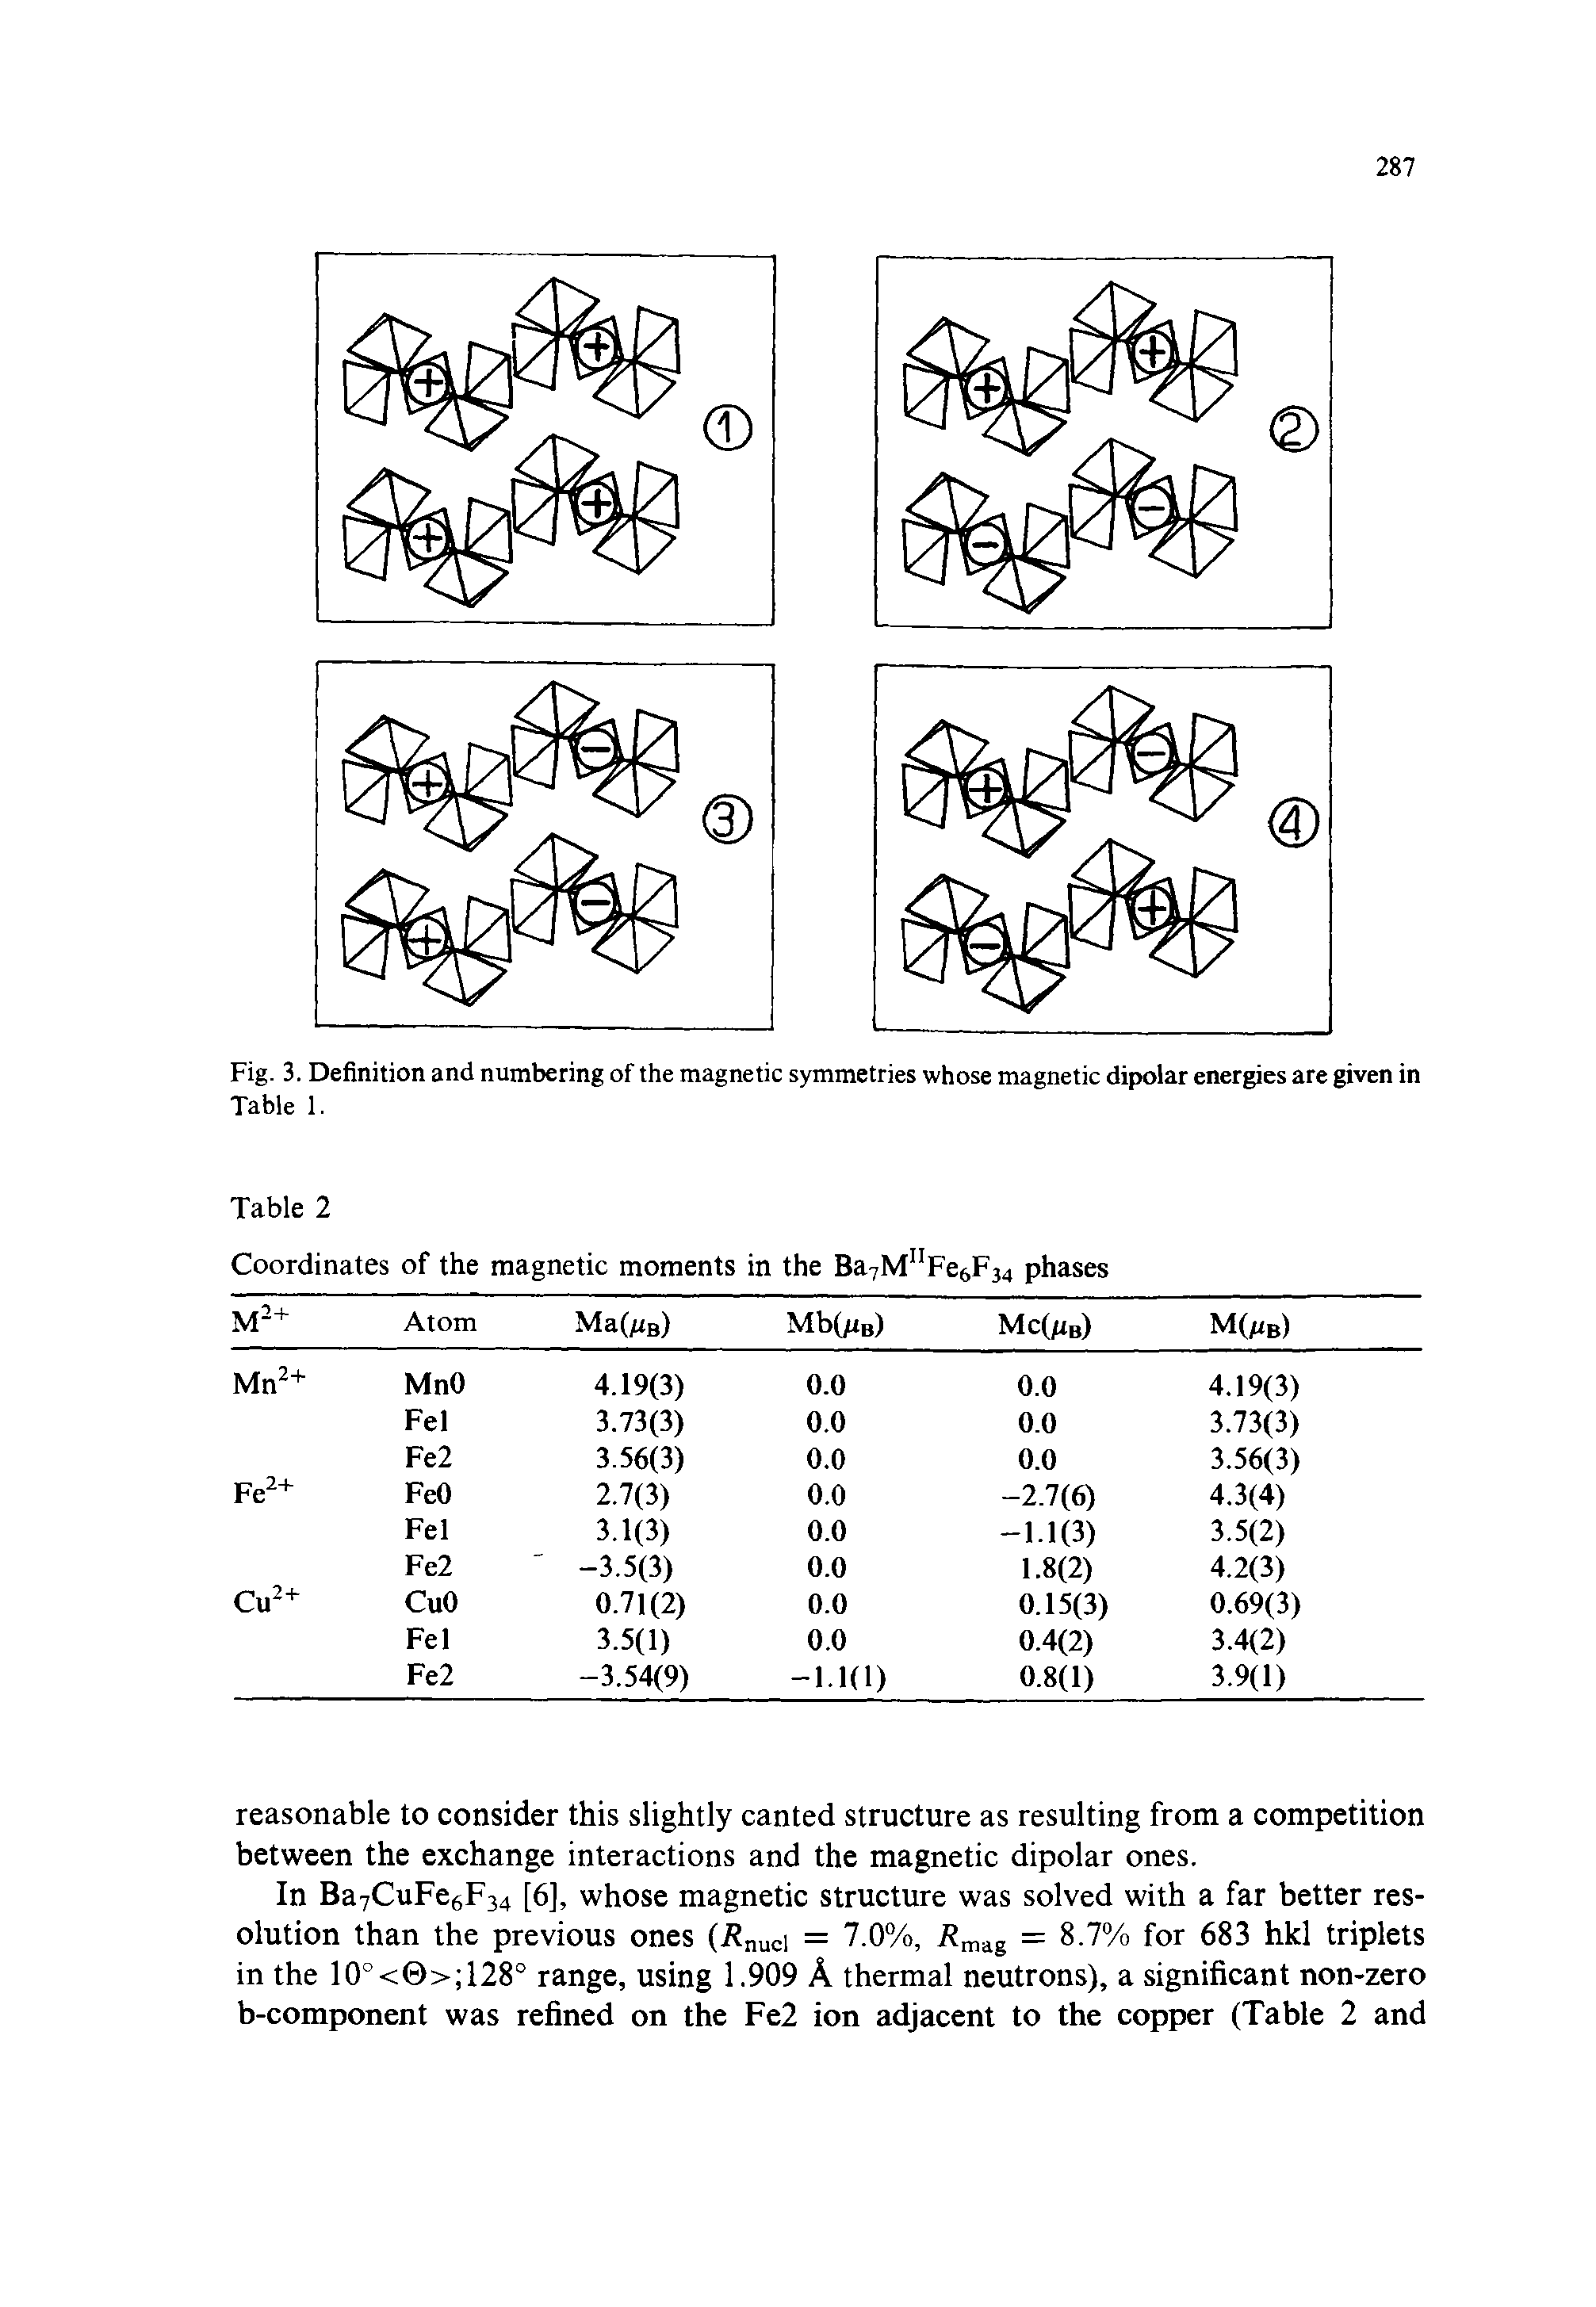 Fig. 3. Definition and numbering of the magnetic symmetries whose magnetic dipolar energies are given in Table 1.